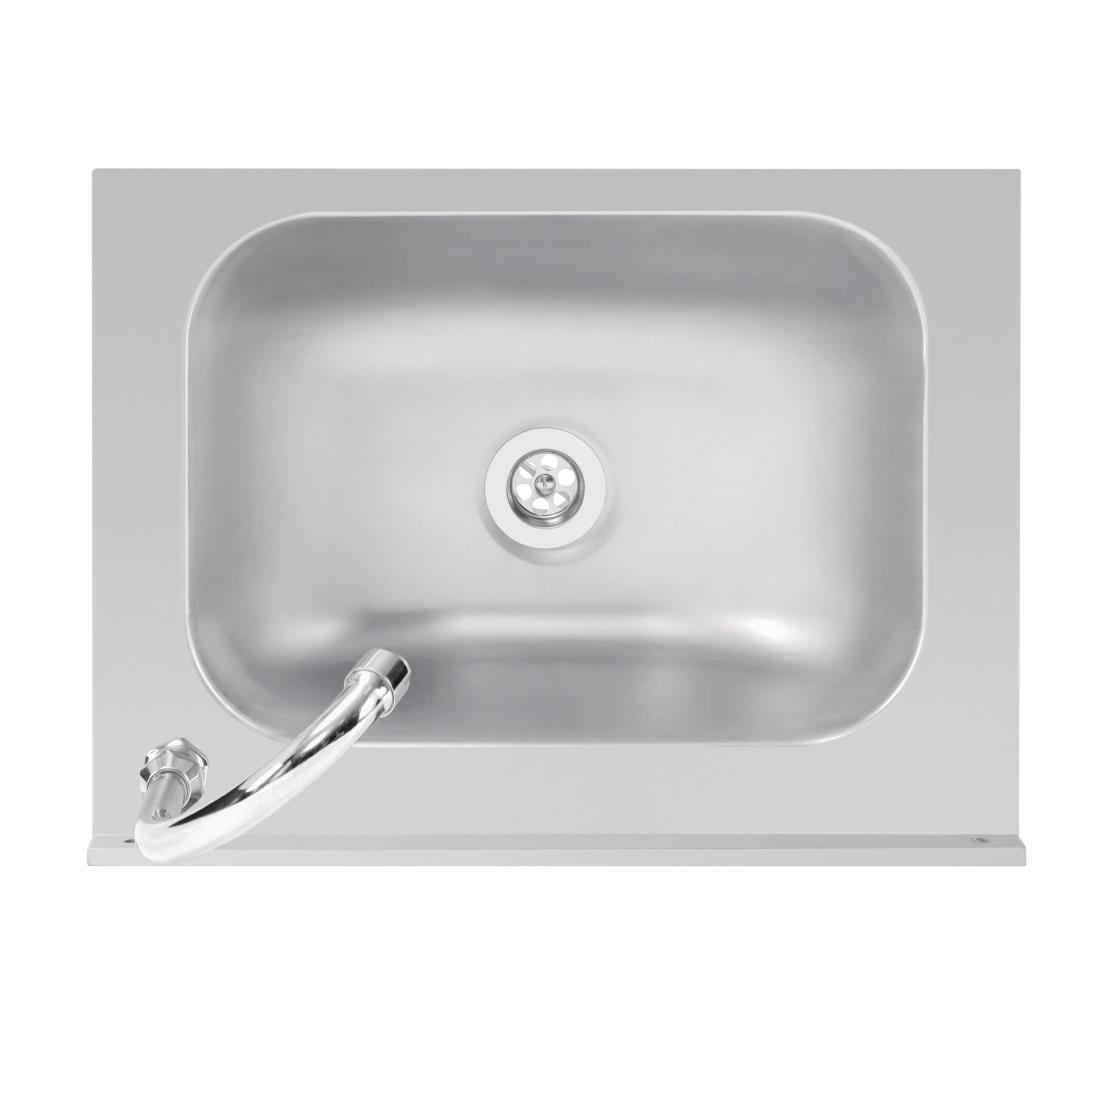 Vogue Stainless Steel Knee Operated Sink - GL280  - 2